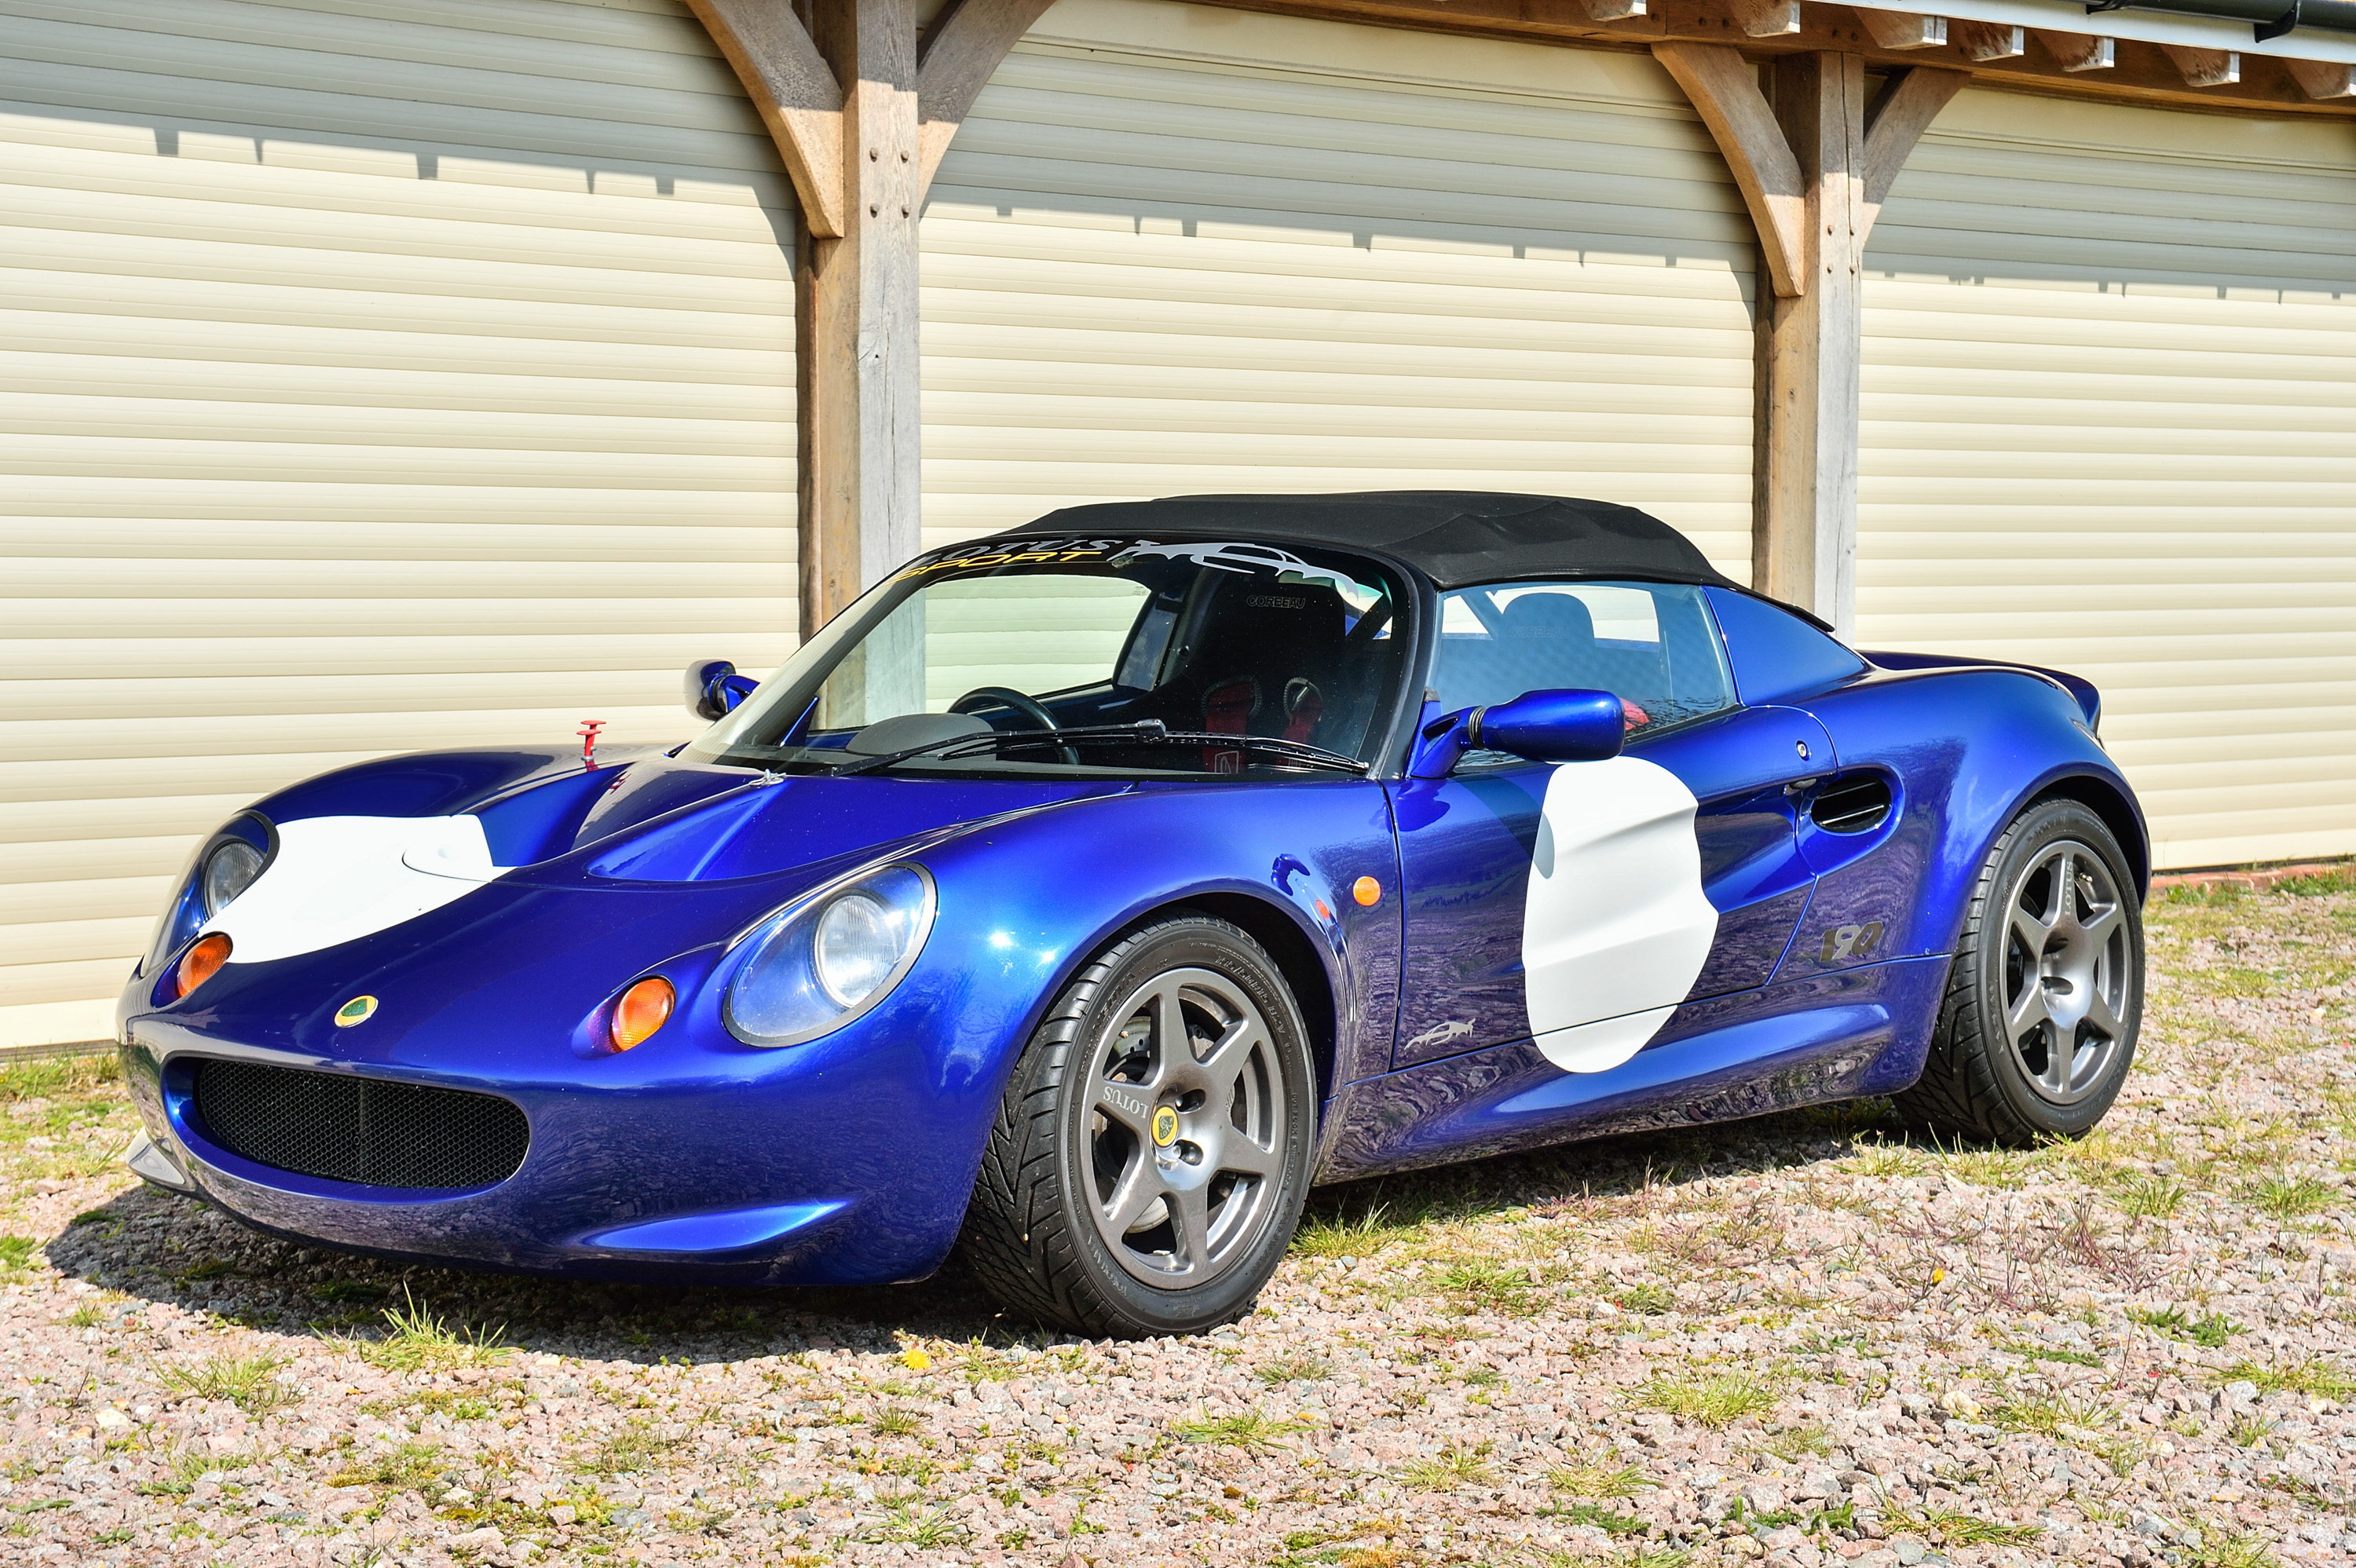 1998 LOTUS ELISE SPORT 190 for sale by auction in Suffolk, United Kingdom picture